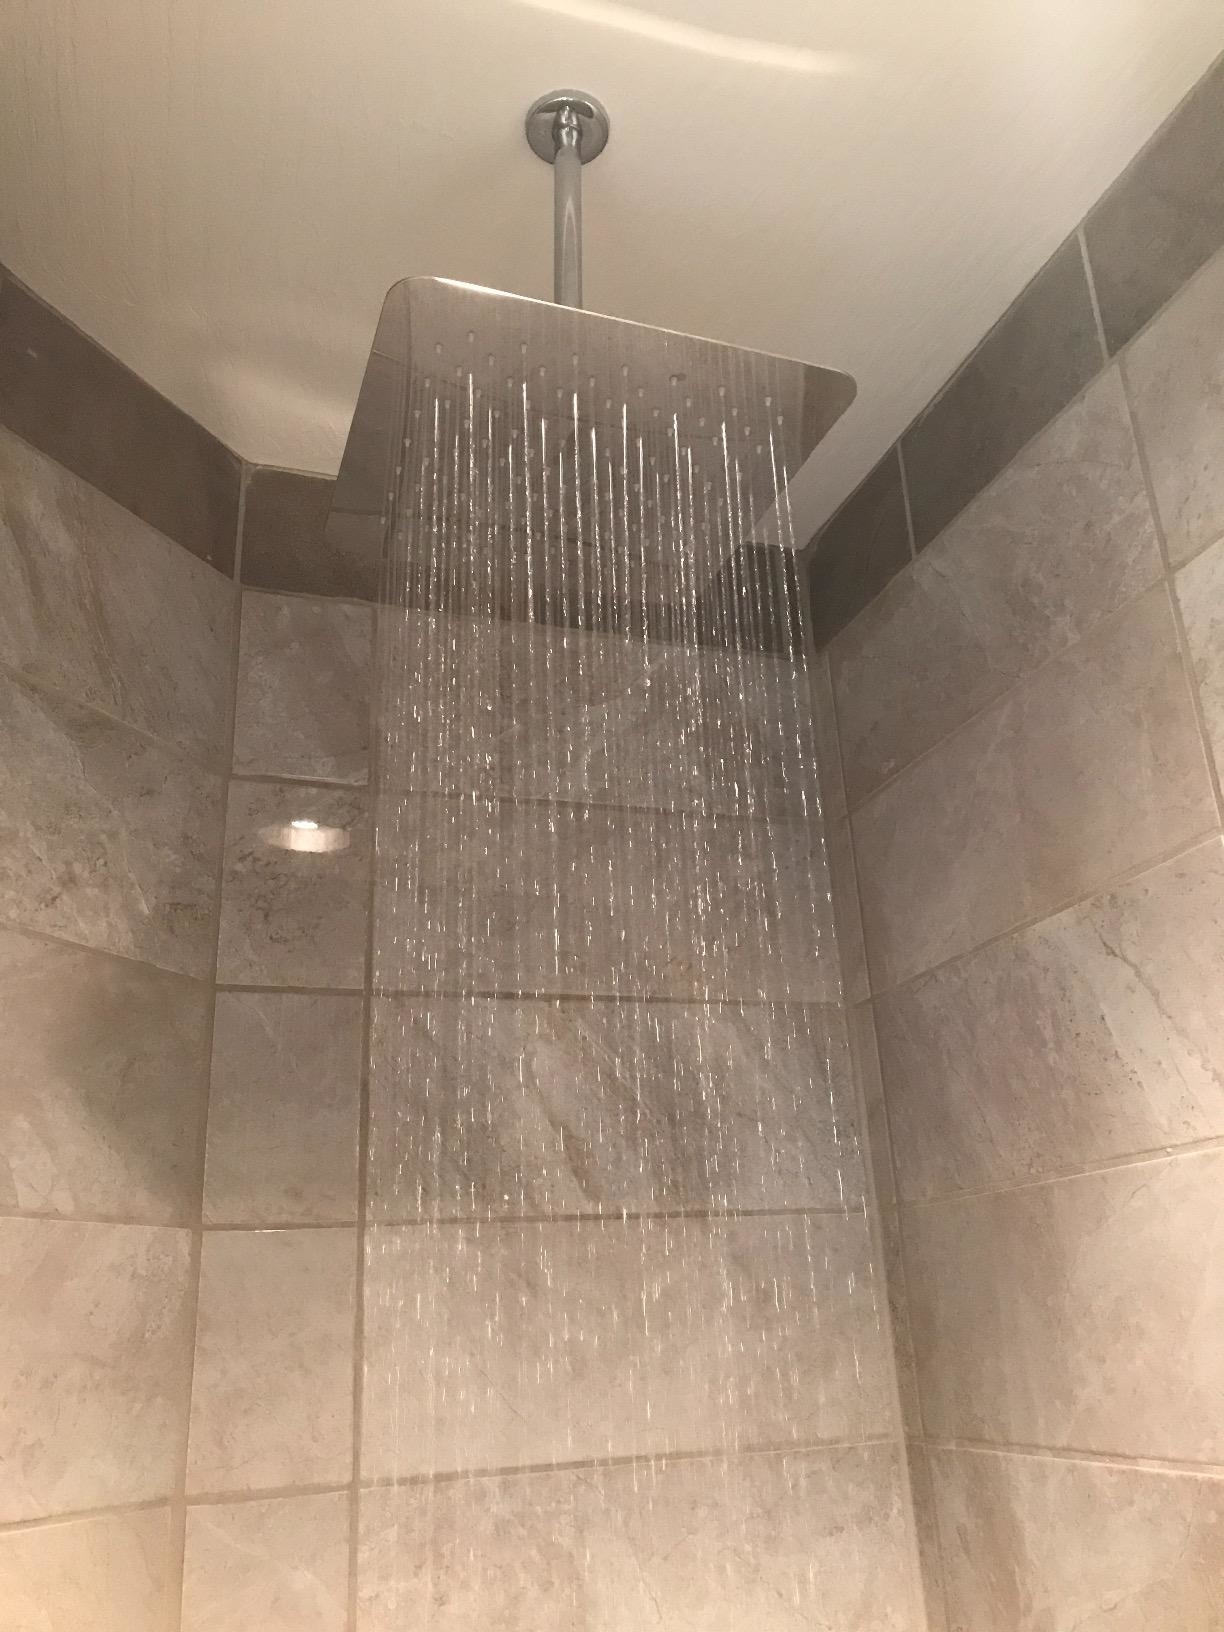 Modern rainfall showerhead streaming water in a tiled shower stall